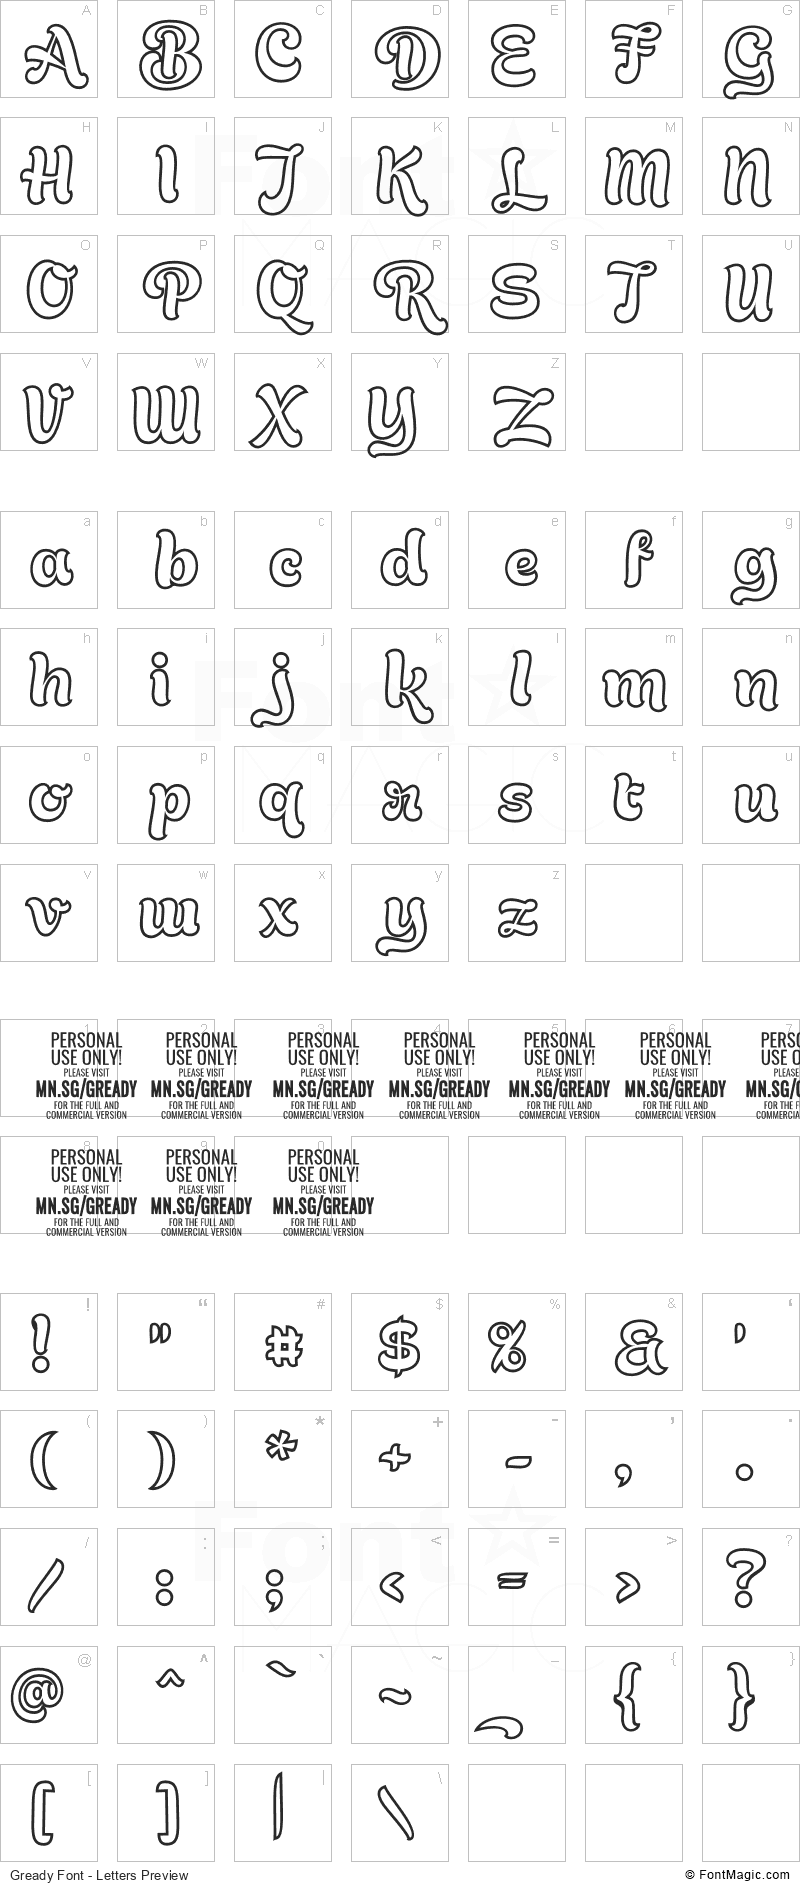 Gready Font - All Latters Preview Chart